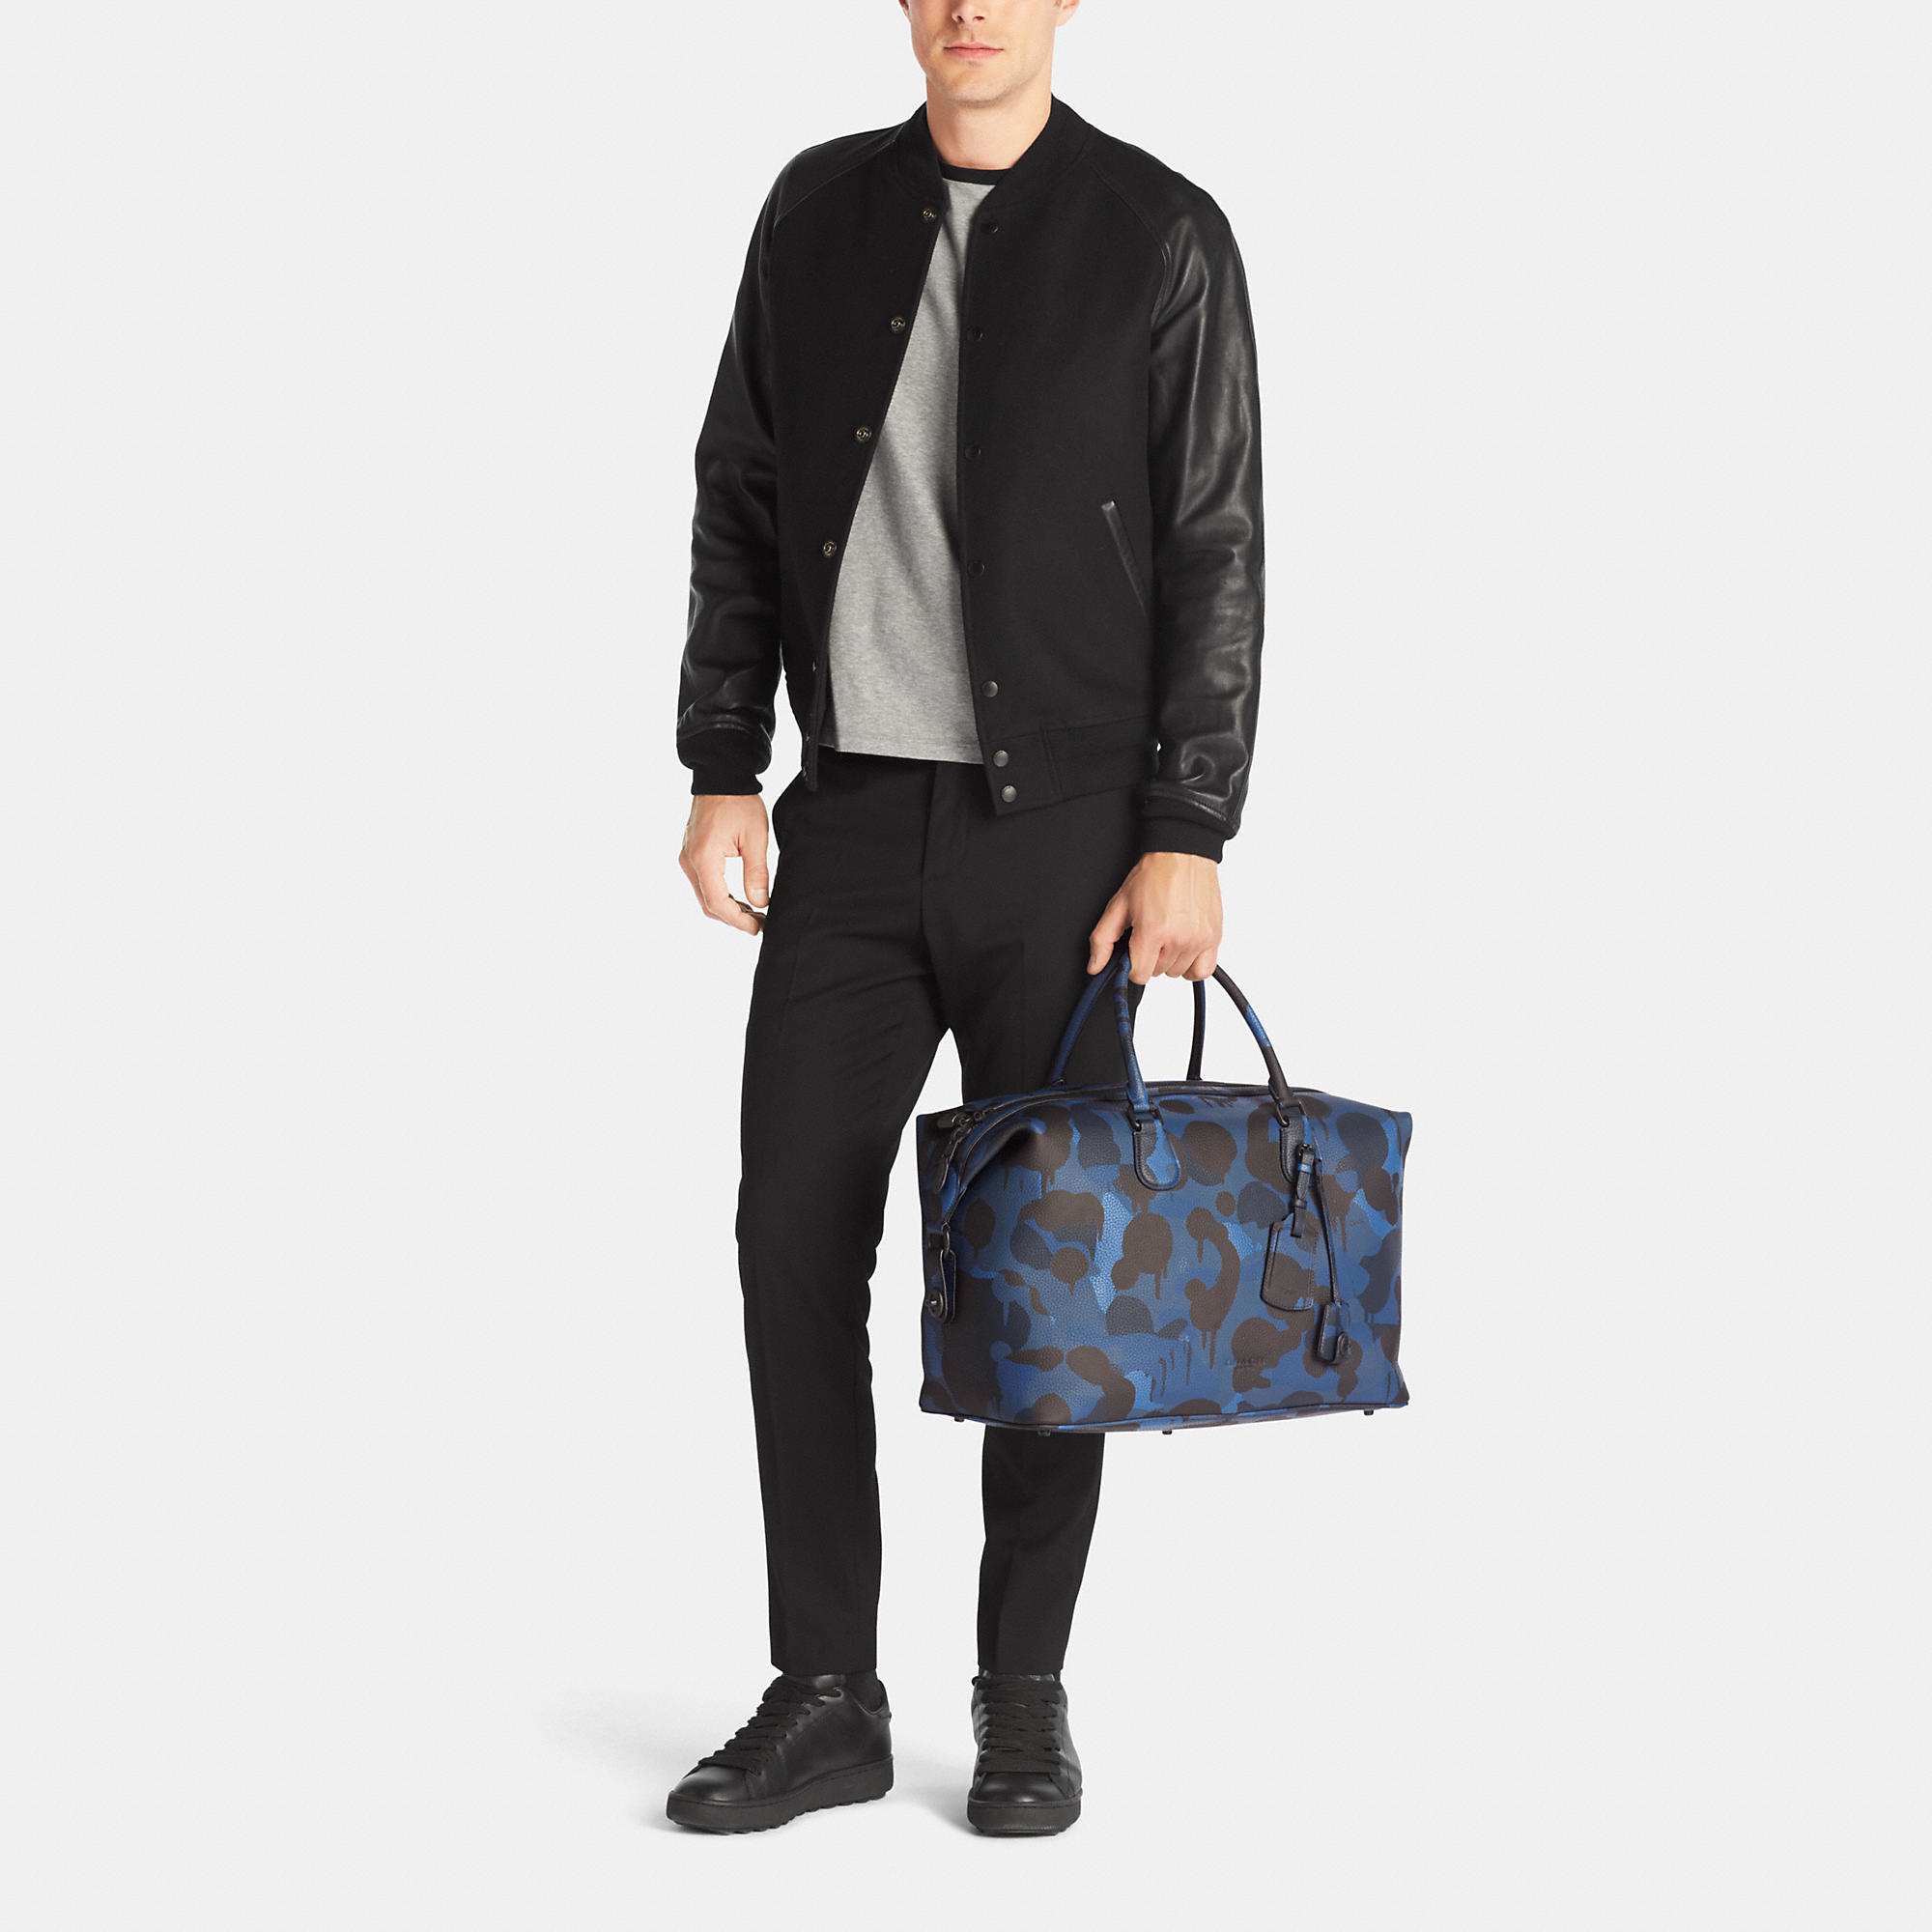 COACH Explorer Duffle In Printed Pebble Leather in Black for Men - Lyst